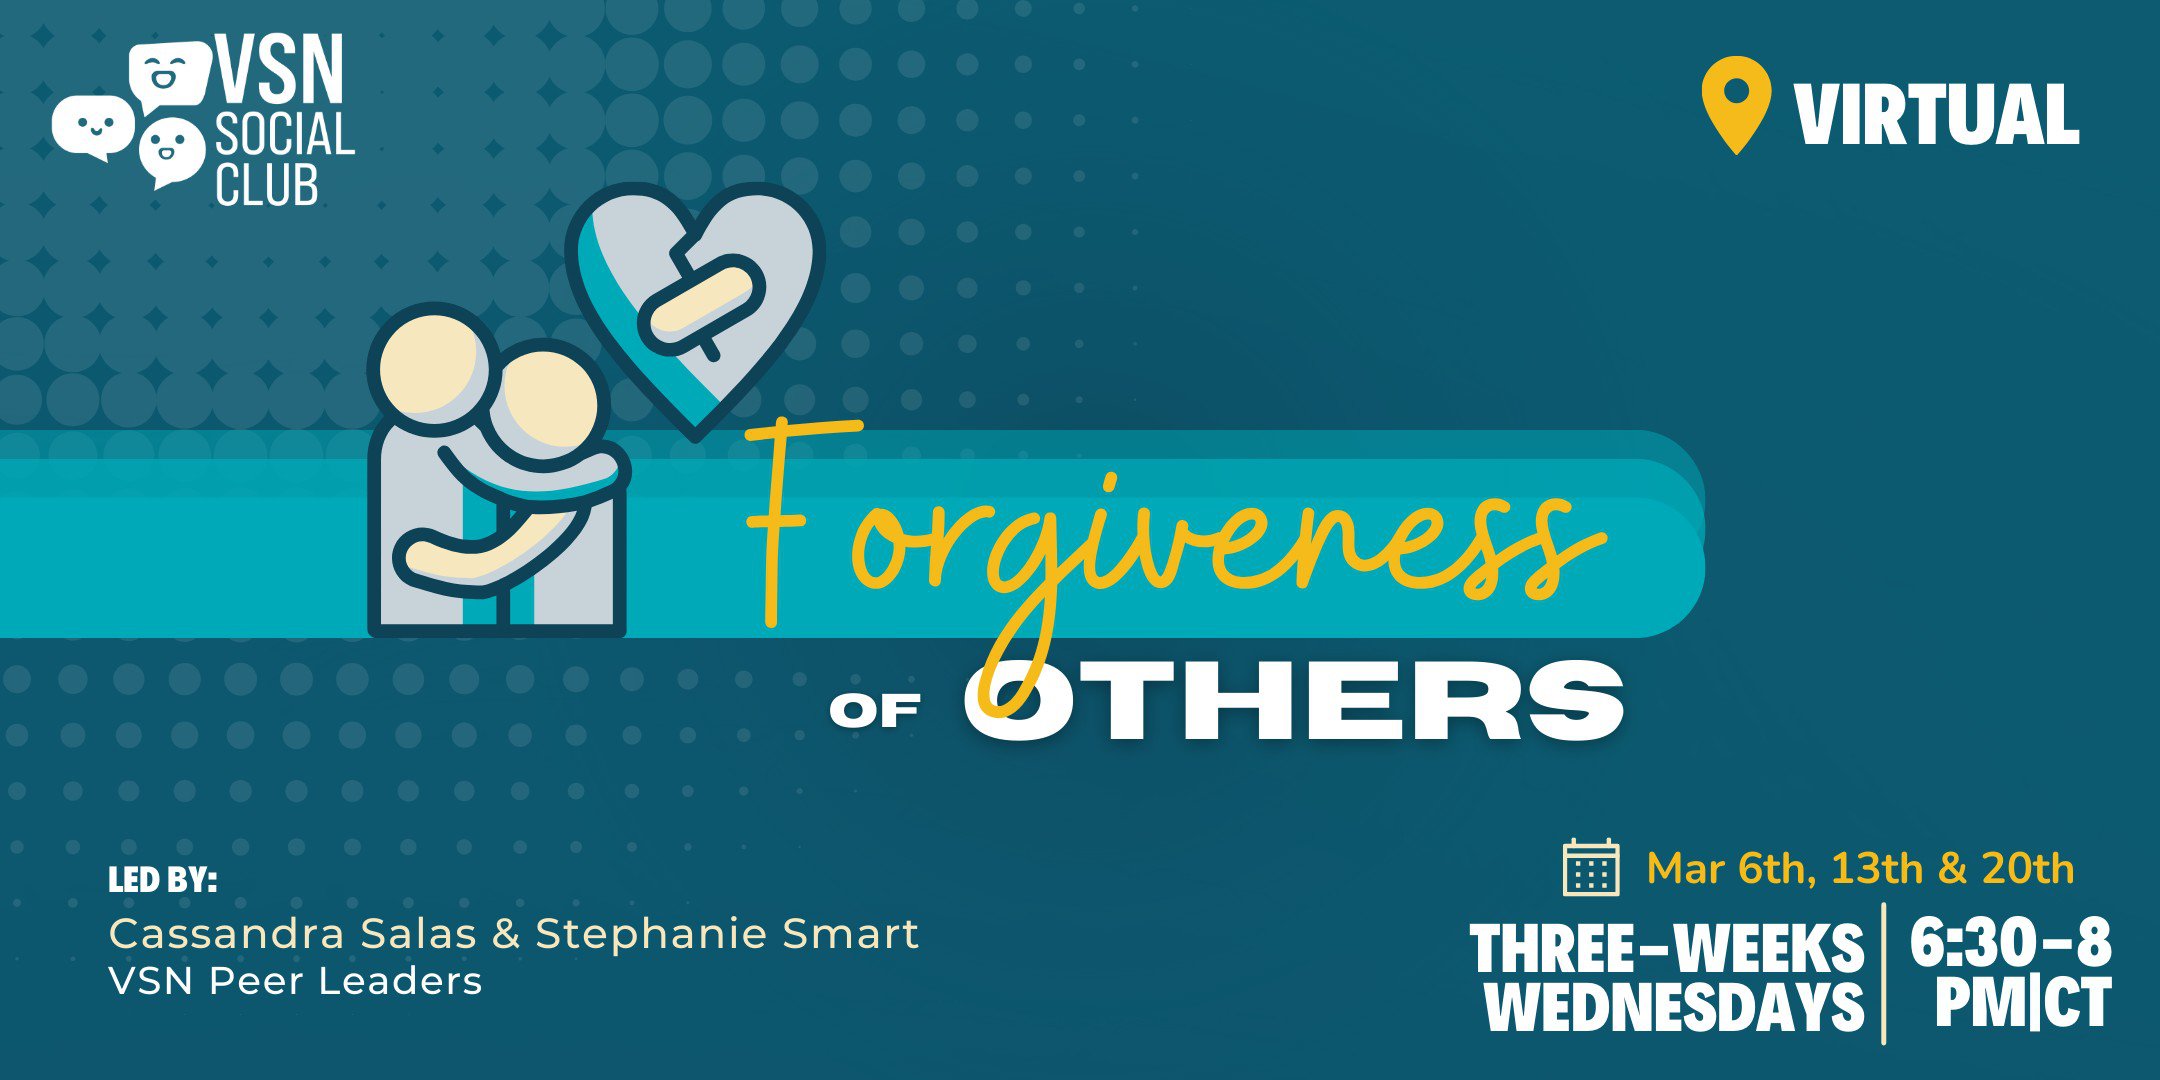 Forgiveness of others